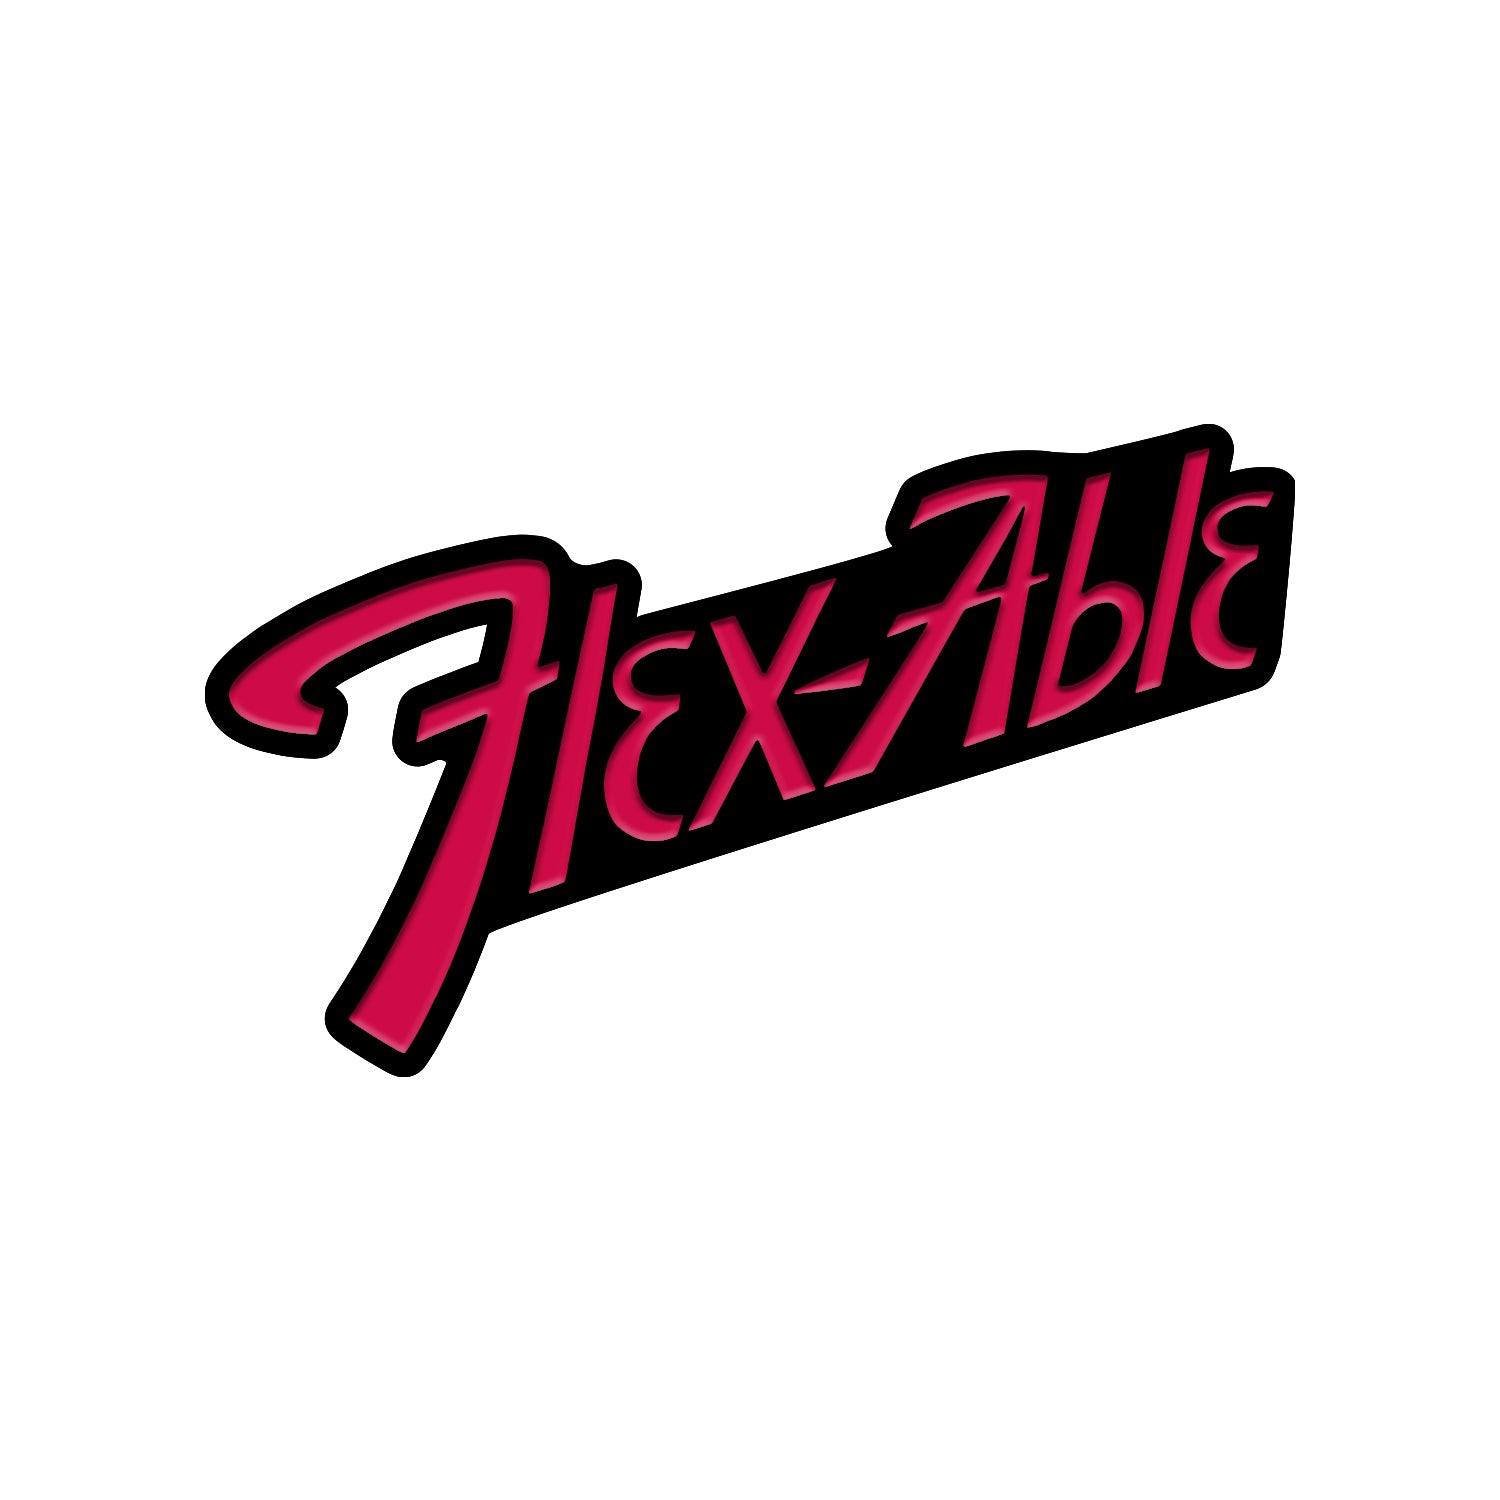 Enamel pin against white background. black pin with the word "flex-able" in red.